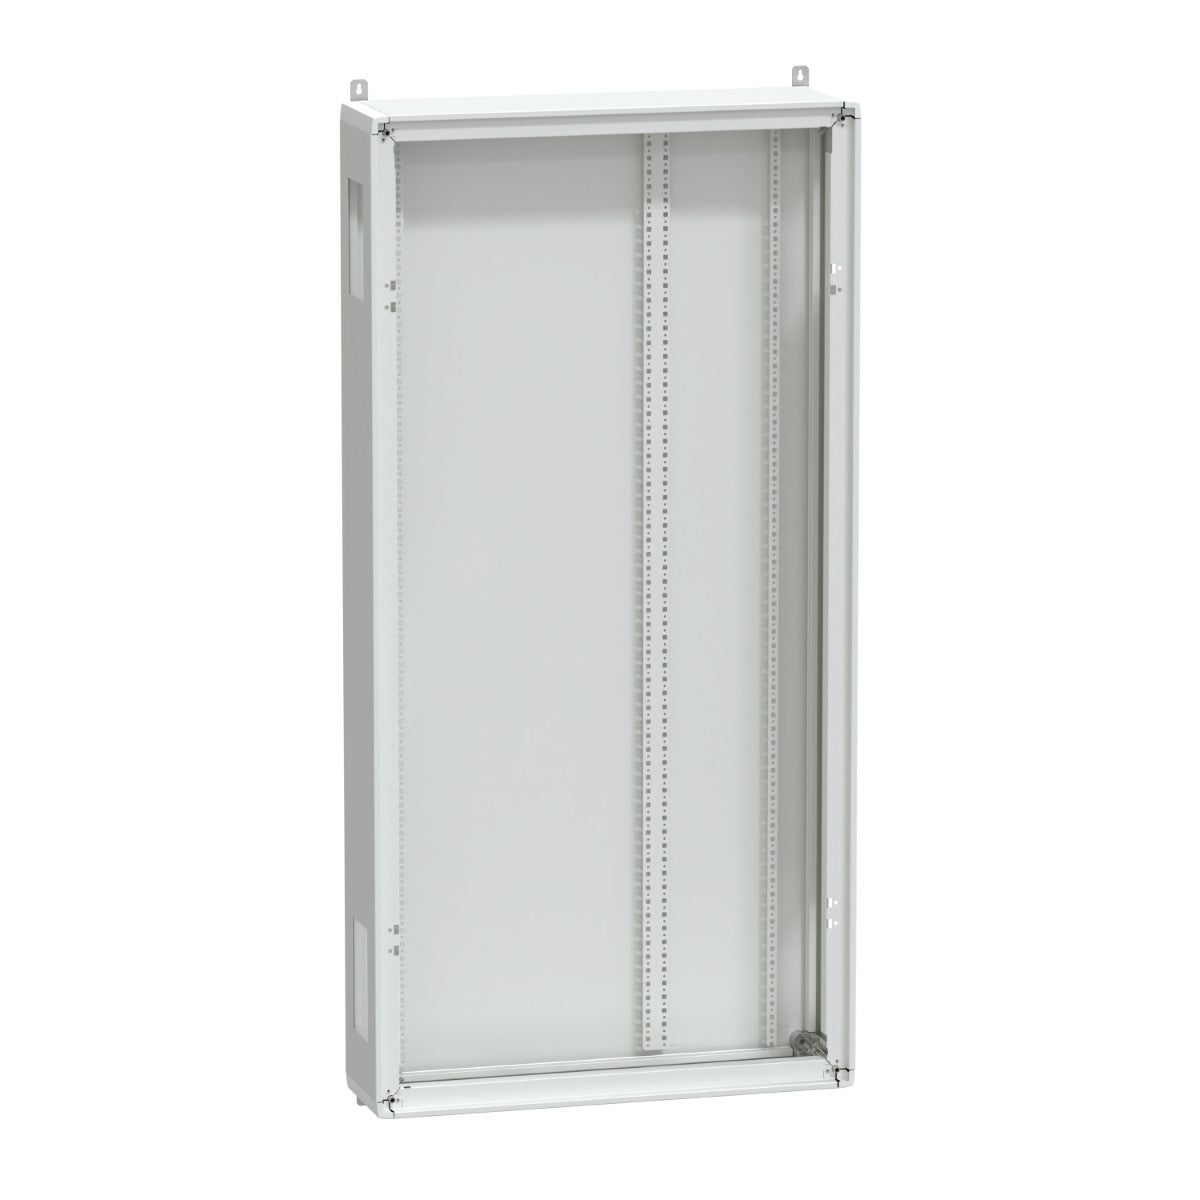 Enclosure, PrismaSeT G, wall mounted/floor standing, without plinth, 33M, W850mm, H1750mm, IP55